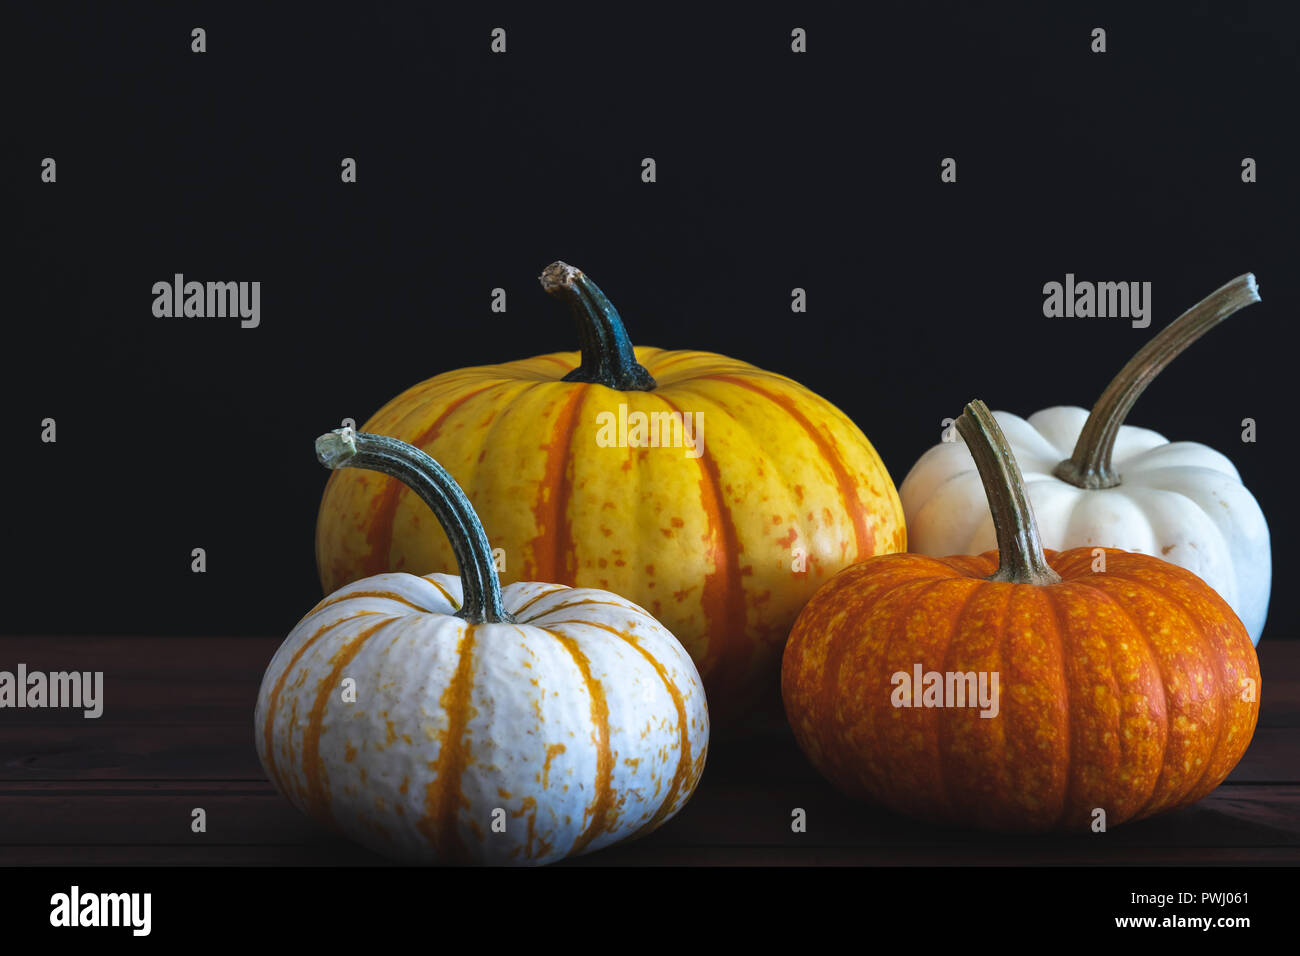 Multiple pumpkins on brown table with black background for copy space of holiday messaging. Stock Photo